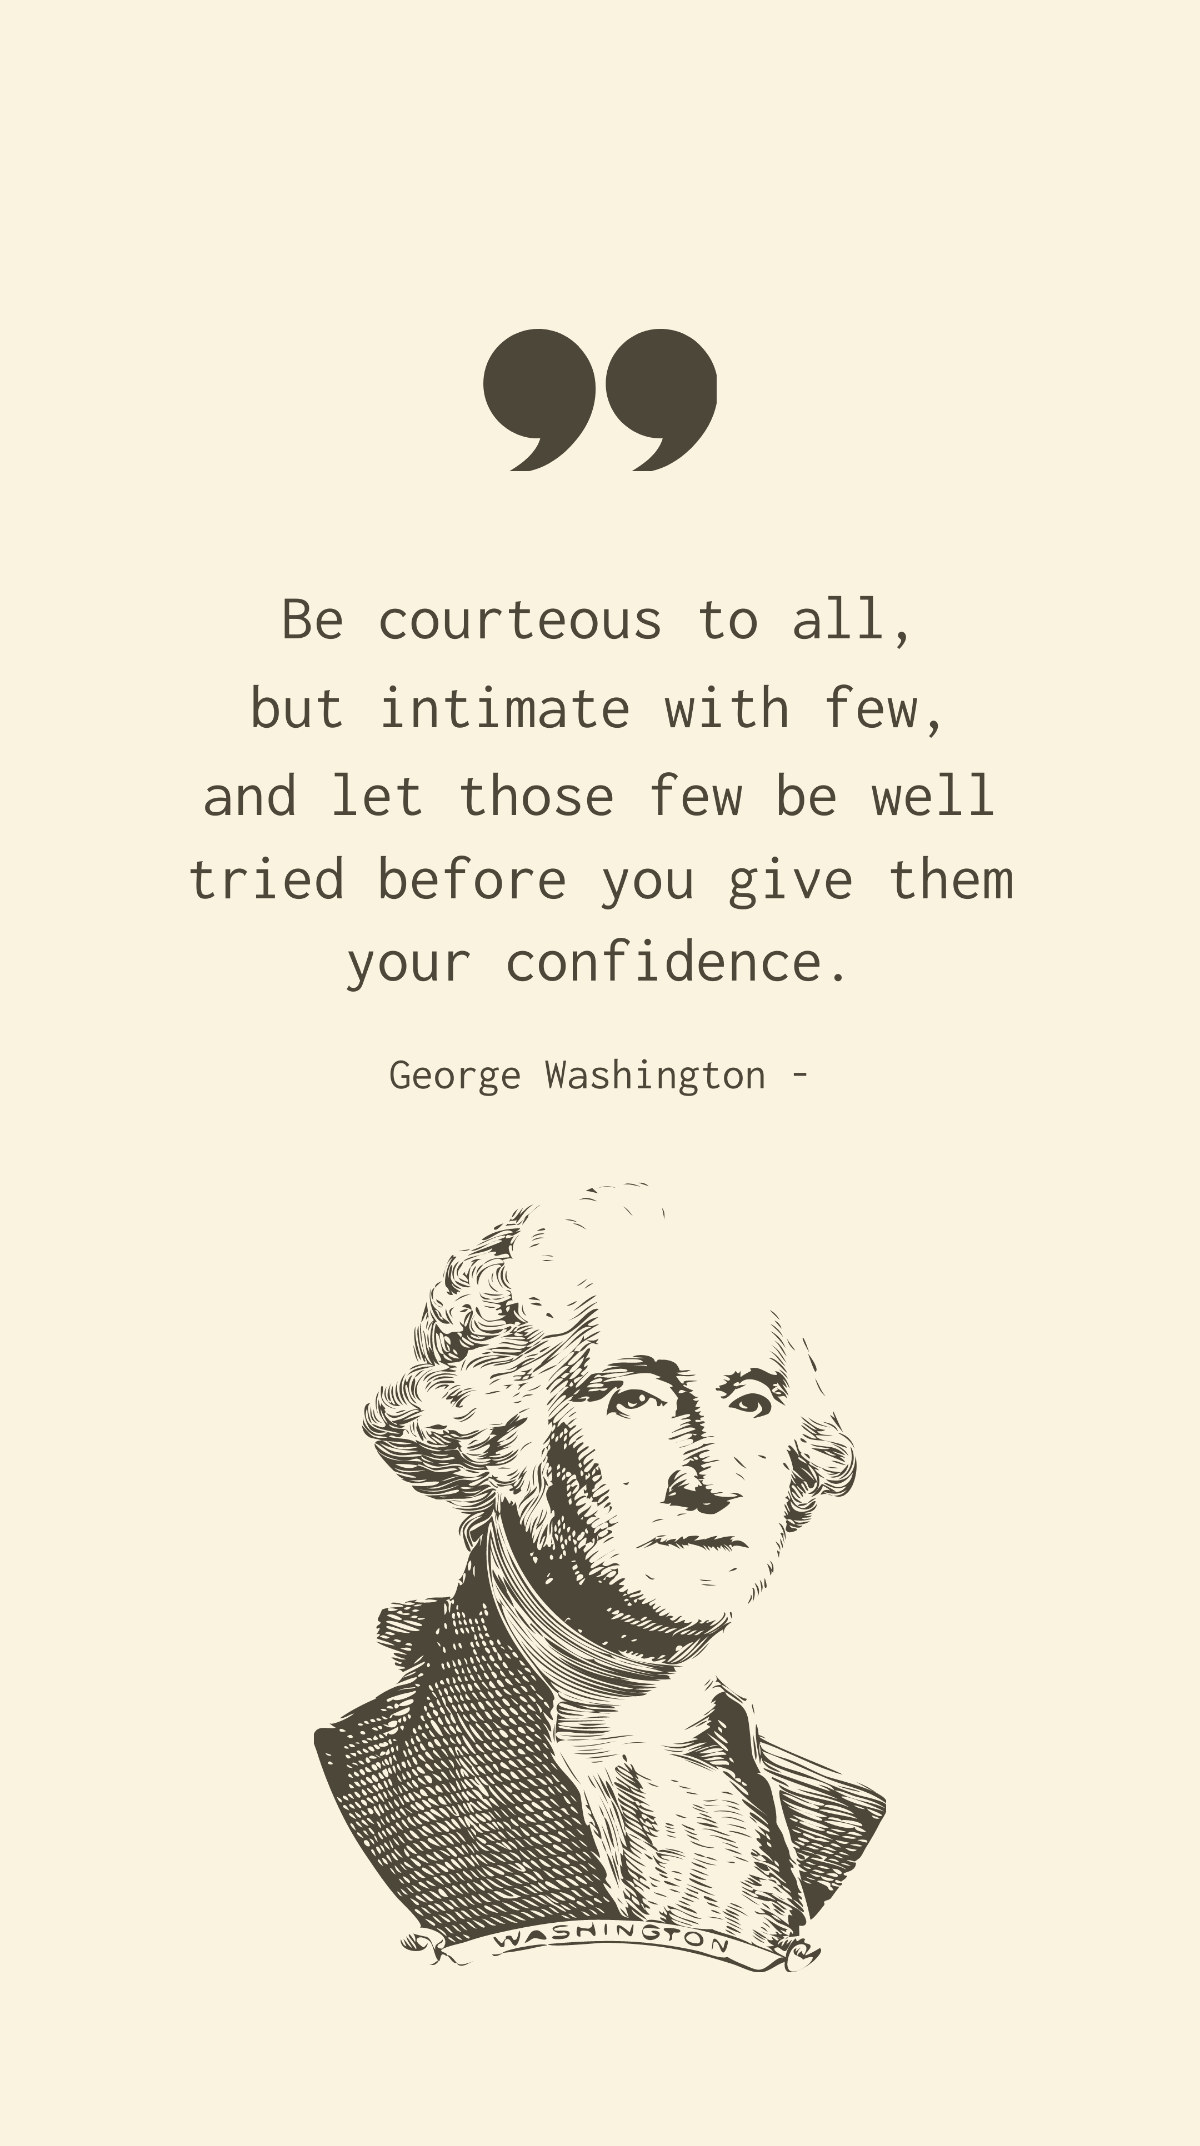 Free George Washington - Be courteous to all, but intimate with few, and let those few be well tried before you give them your confidence. Template